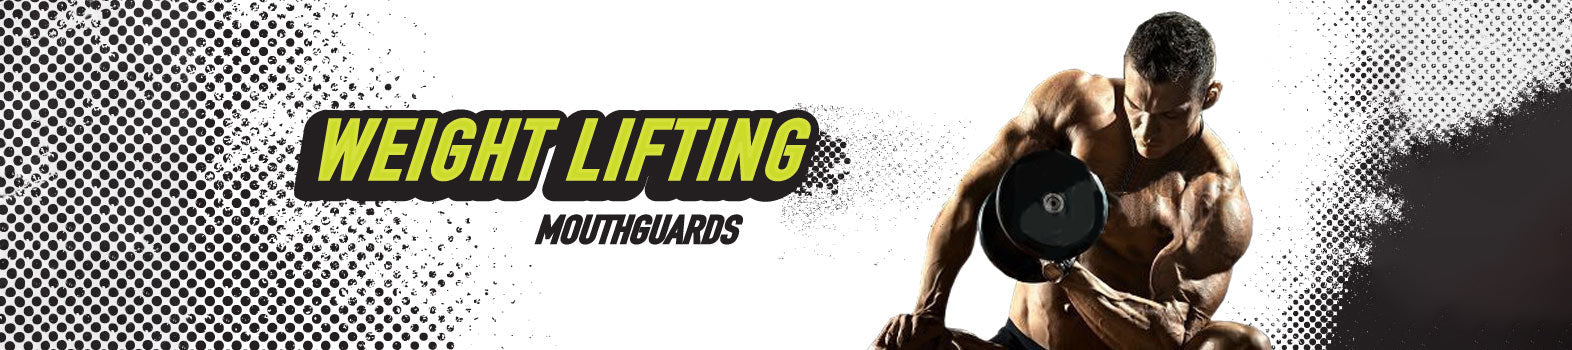 Weightlifting Mouthguards